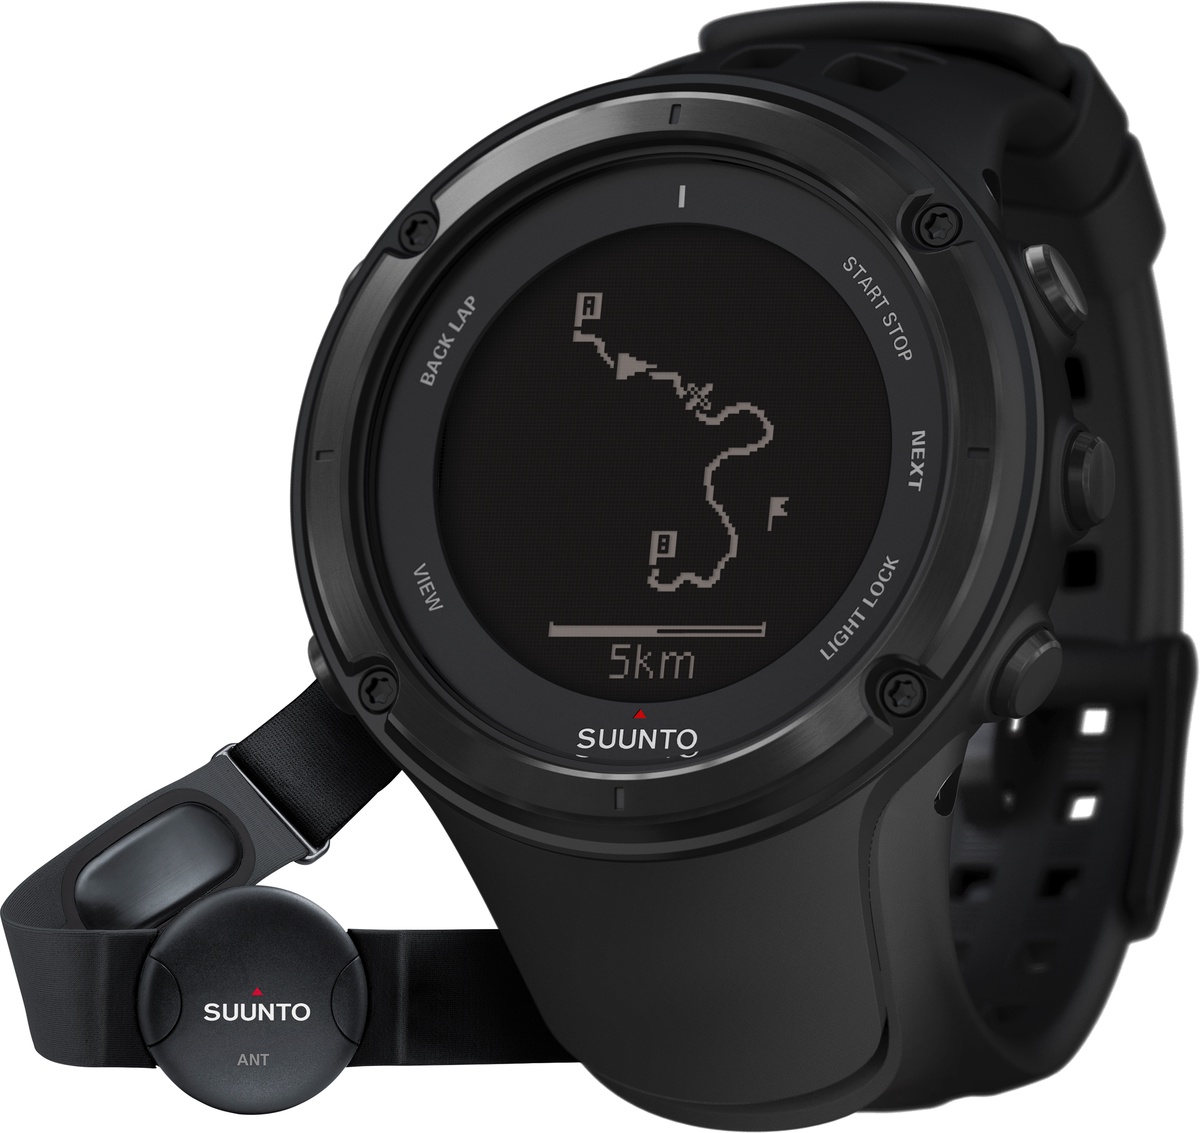 Suunto Watches - Technology at Its Best